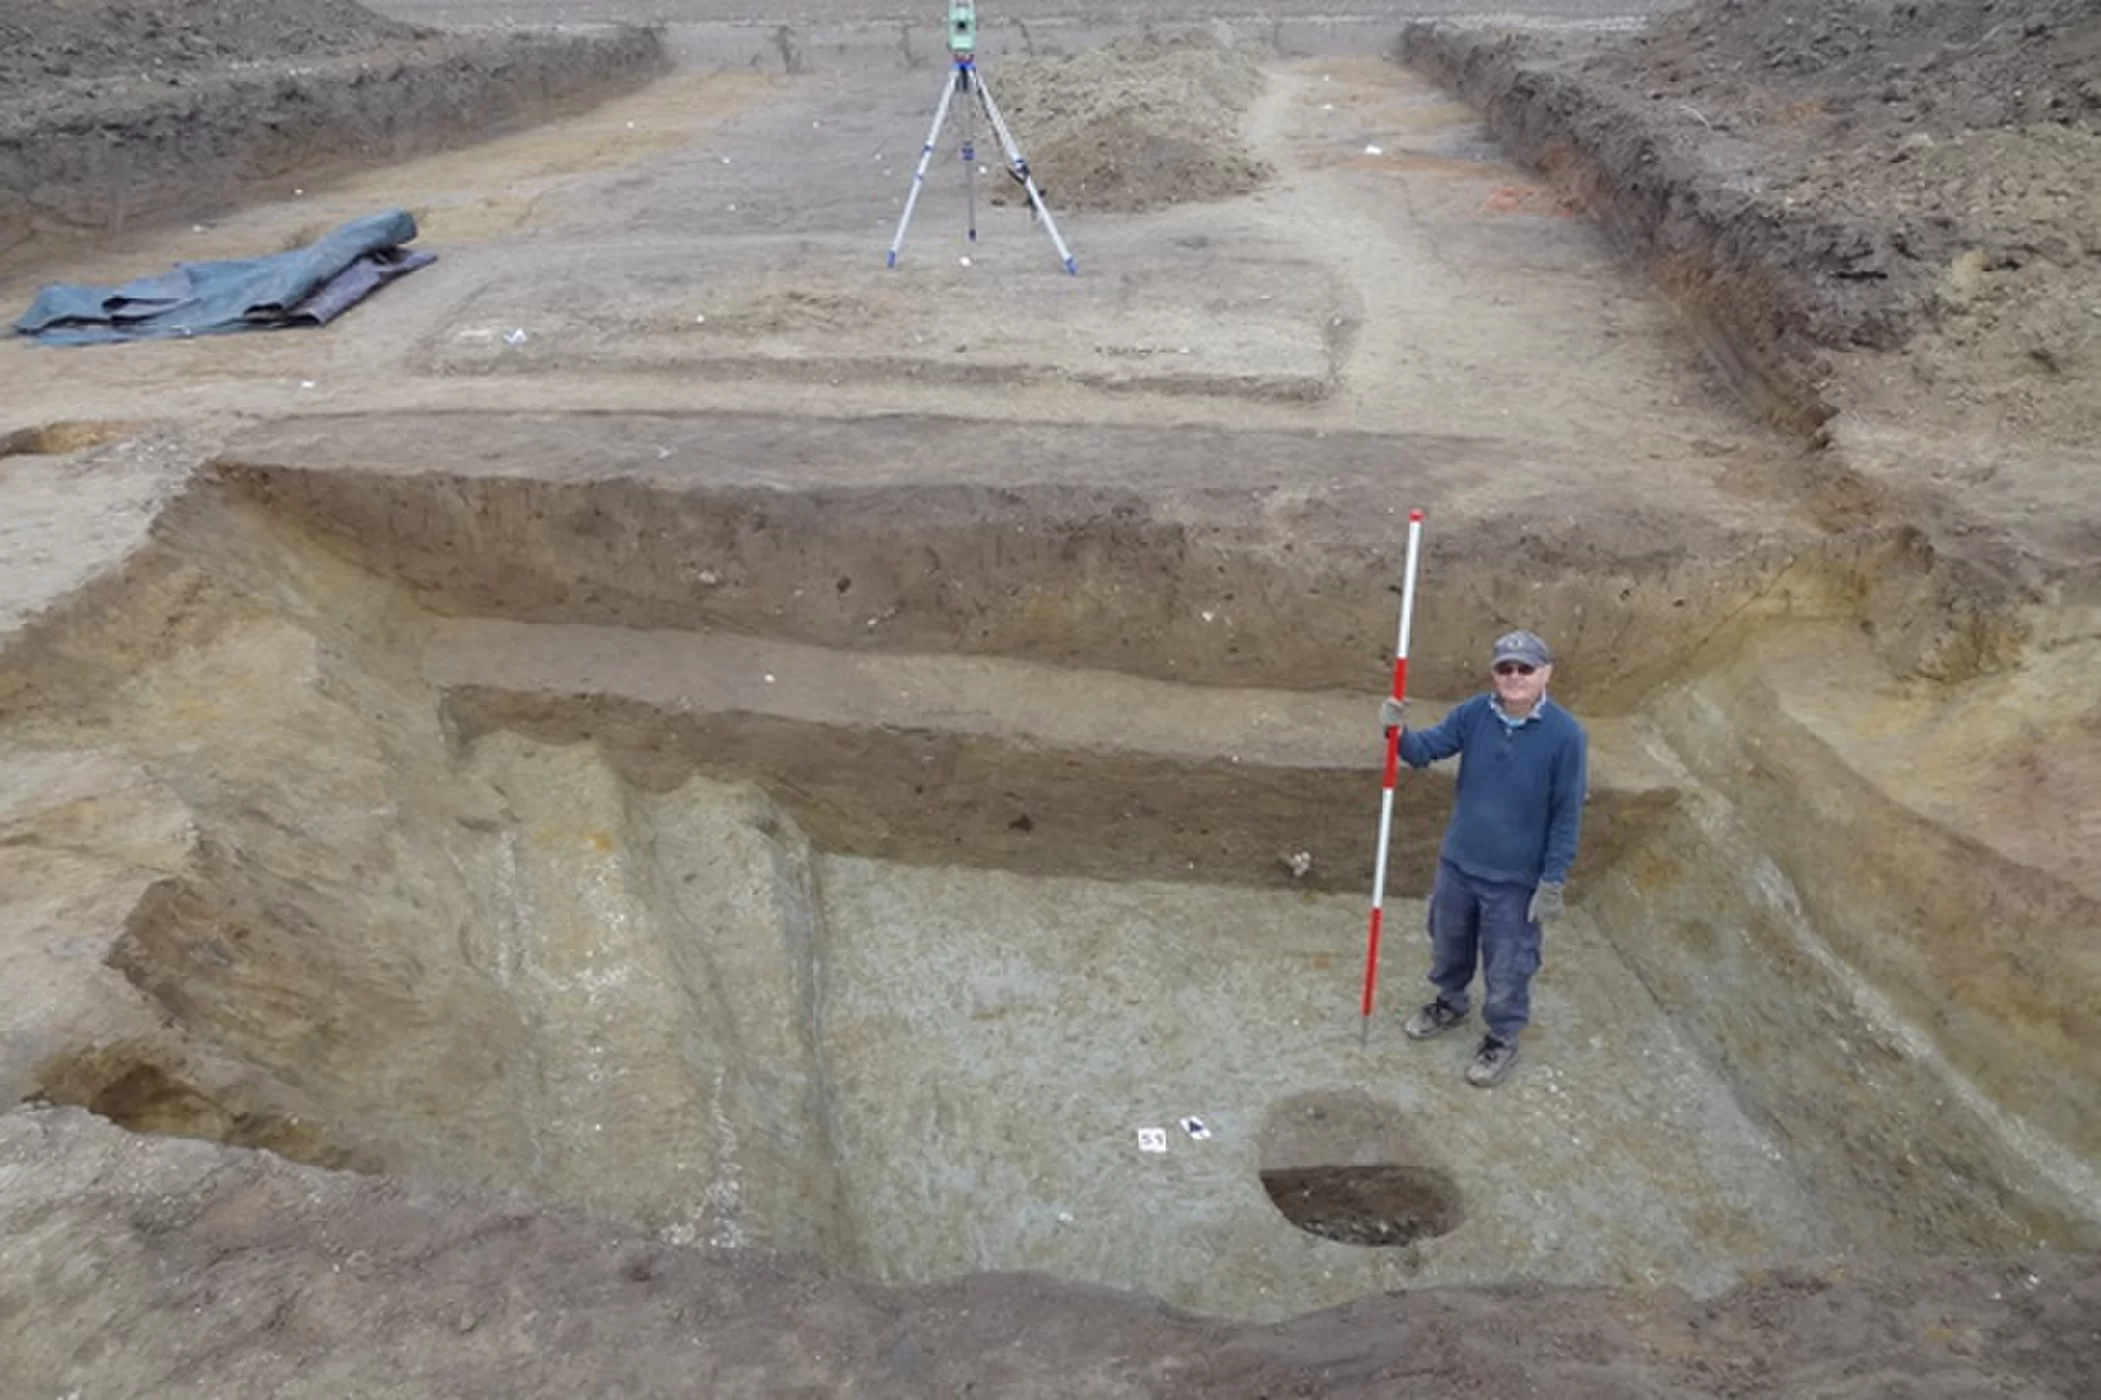 Newest Roman Fort Unearthed, Proof of Julius Caesars Invasions